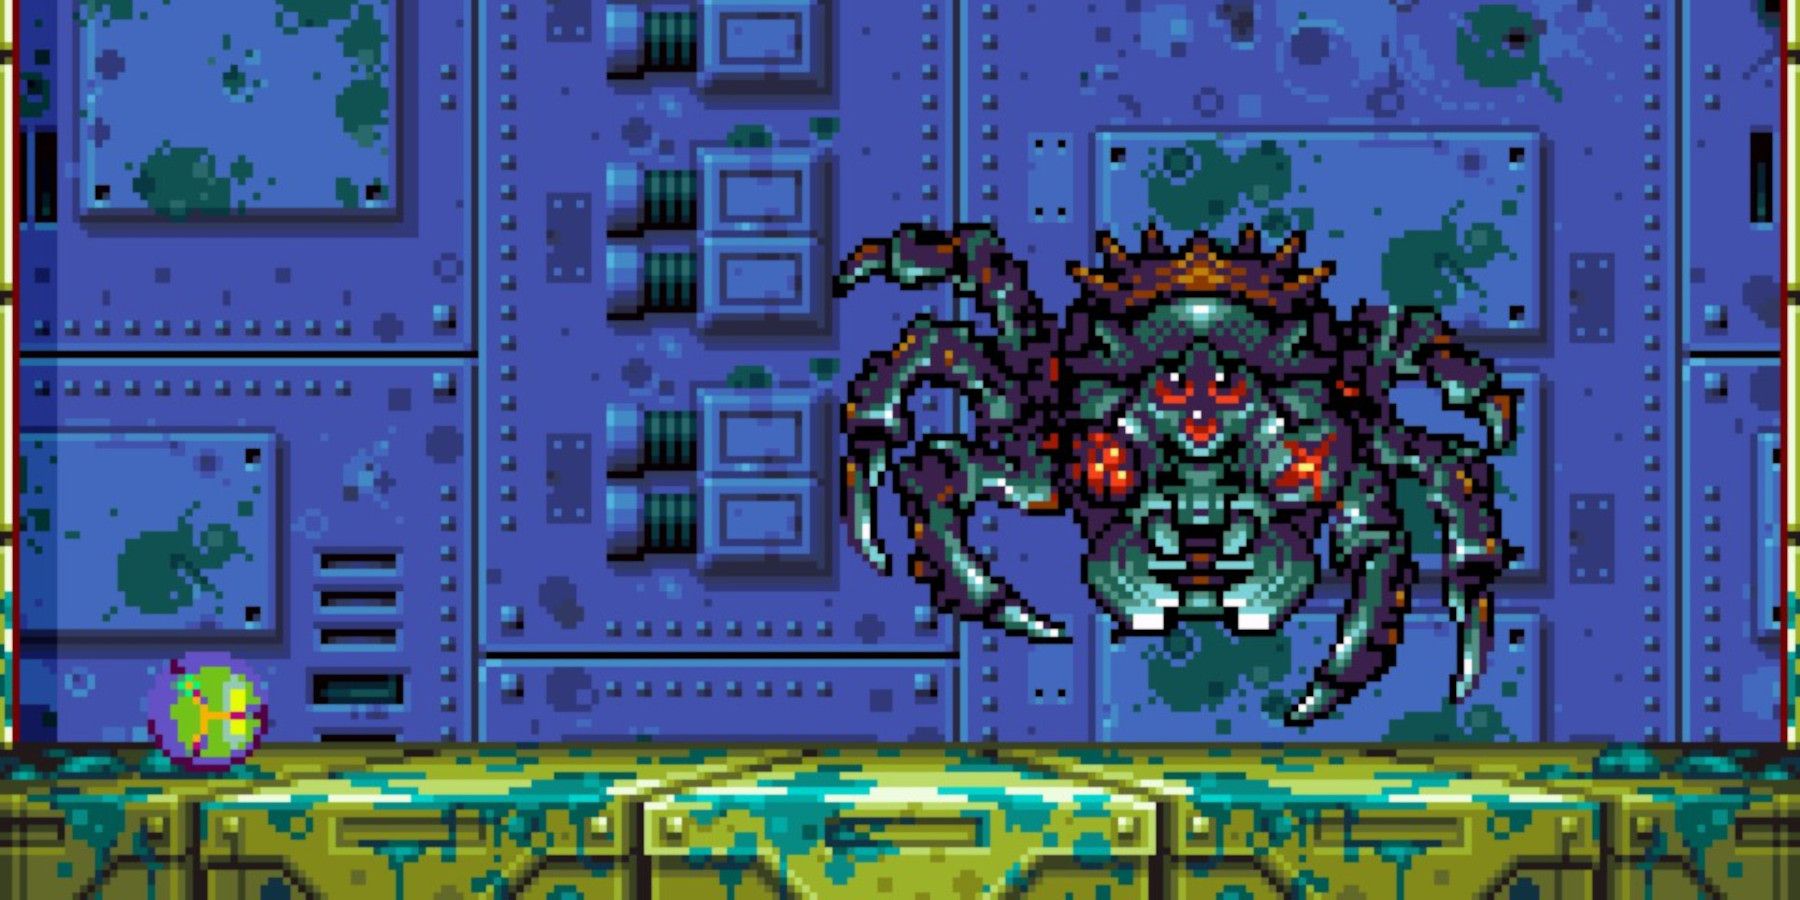 metroid-fusion-where-to-go-after-spider-boss-yakuza-space-jump